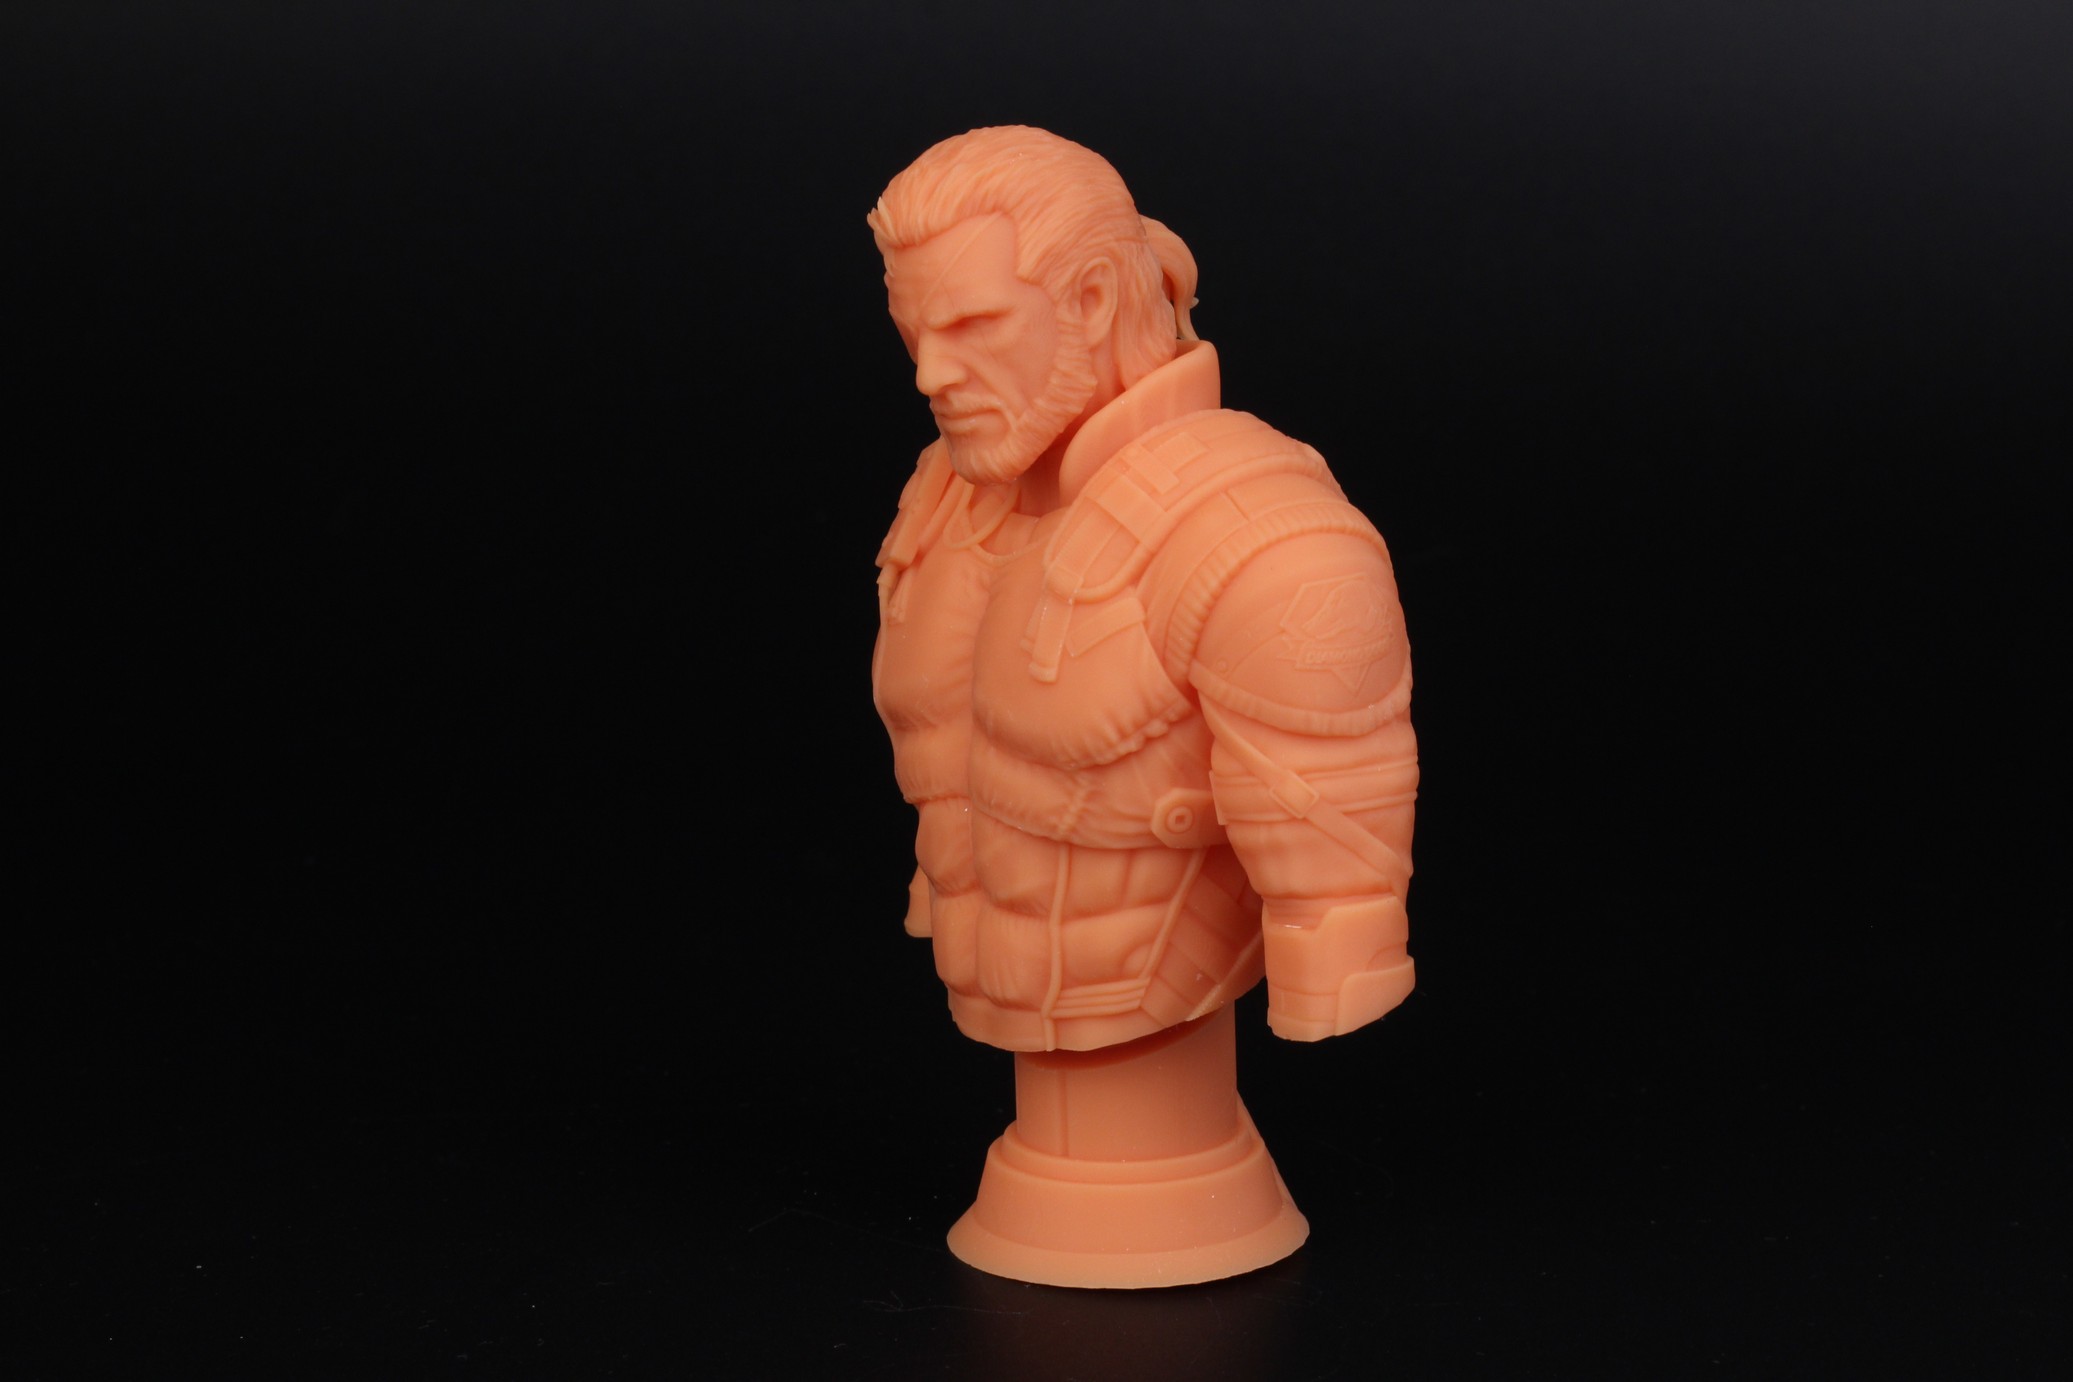 Venom Snake Bust printed on Anycubic Photon M3 Max 3 | Anycubic Photon M3 Max Review: Who Needs FDM Anymore?